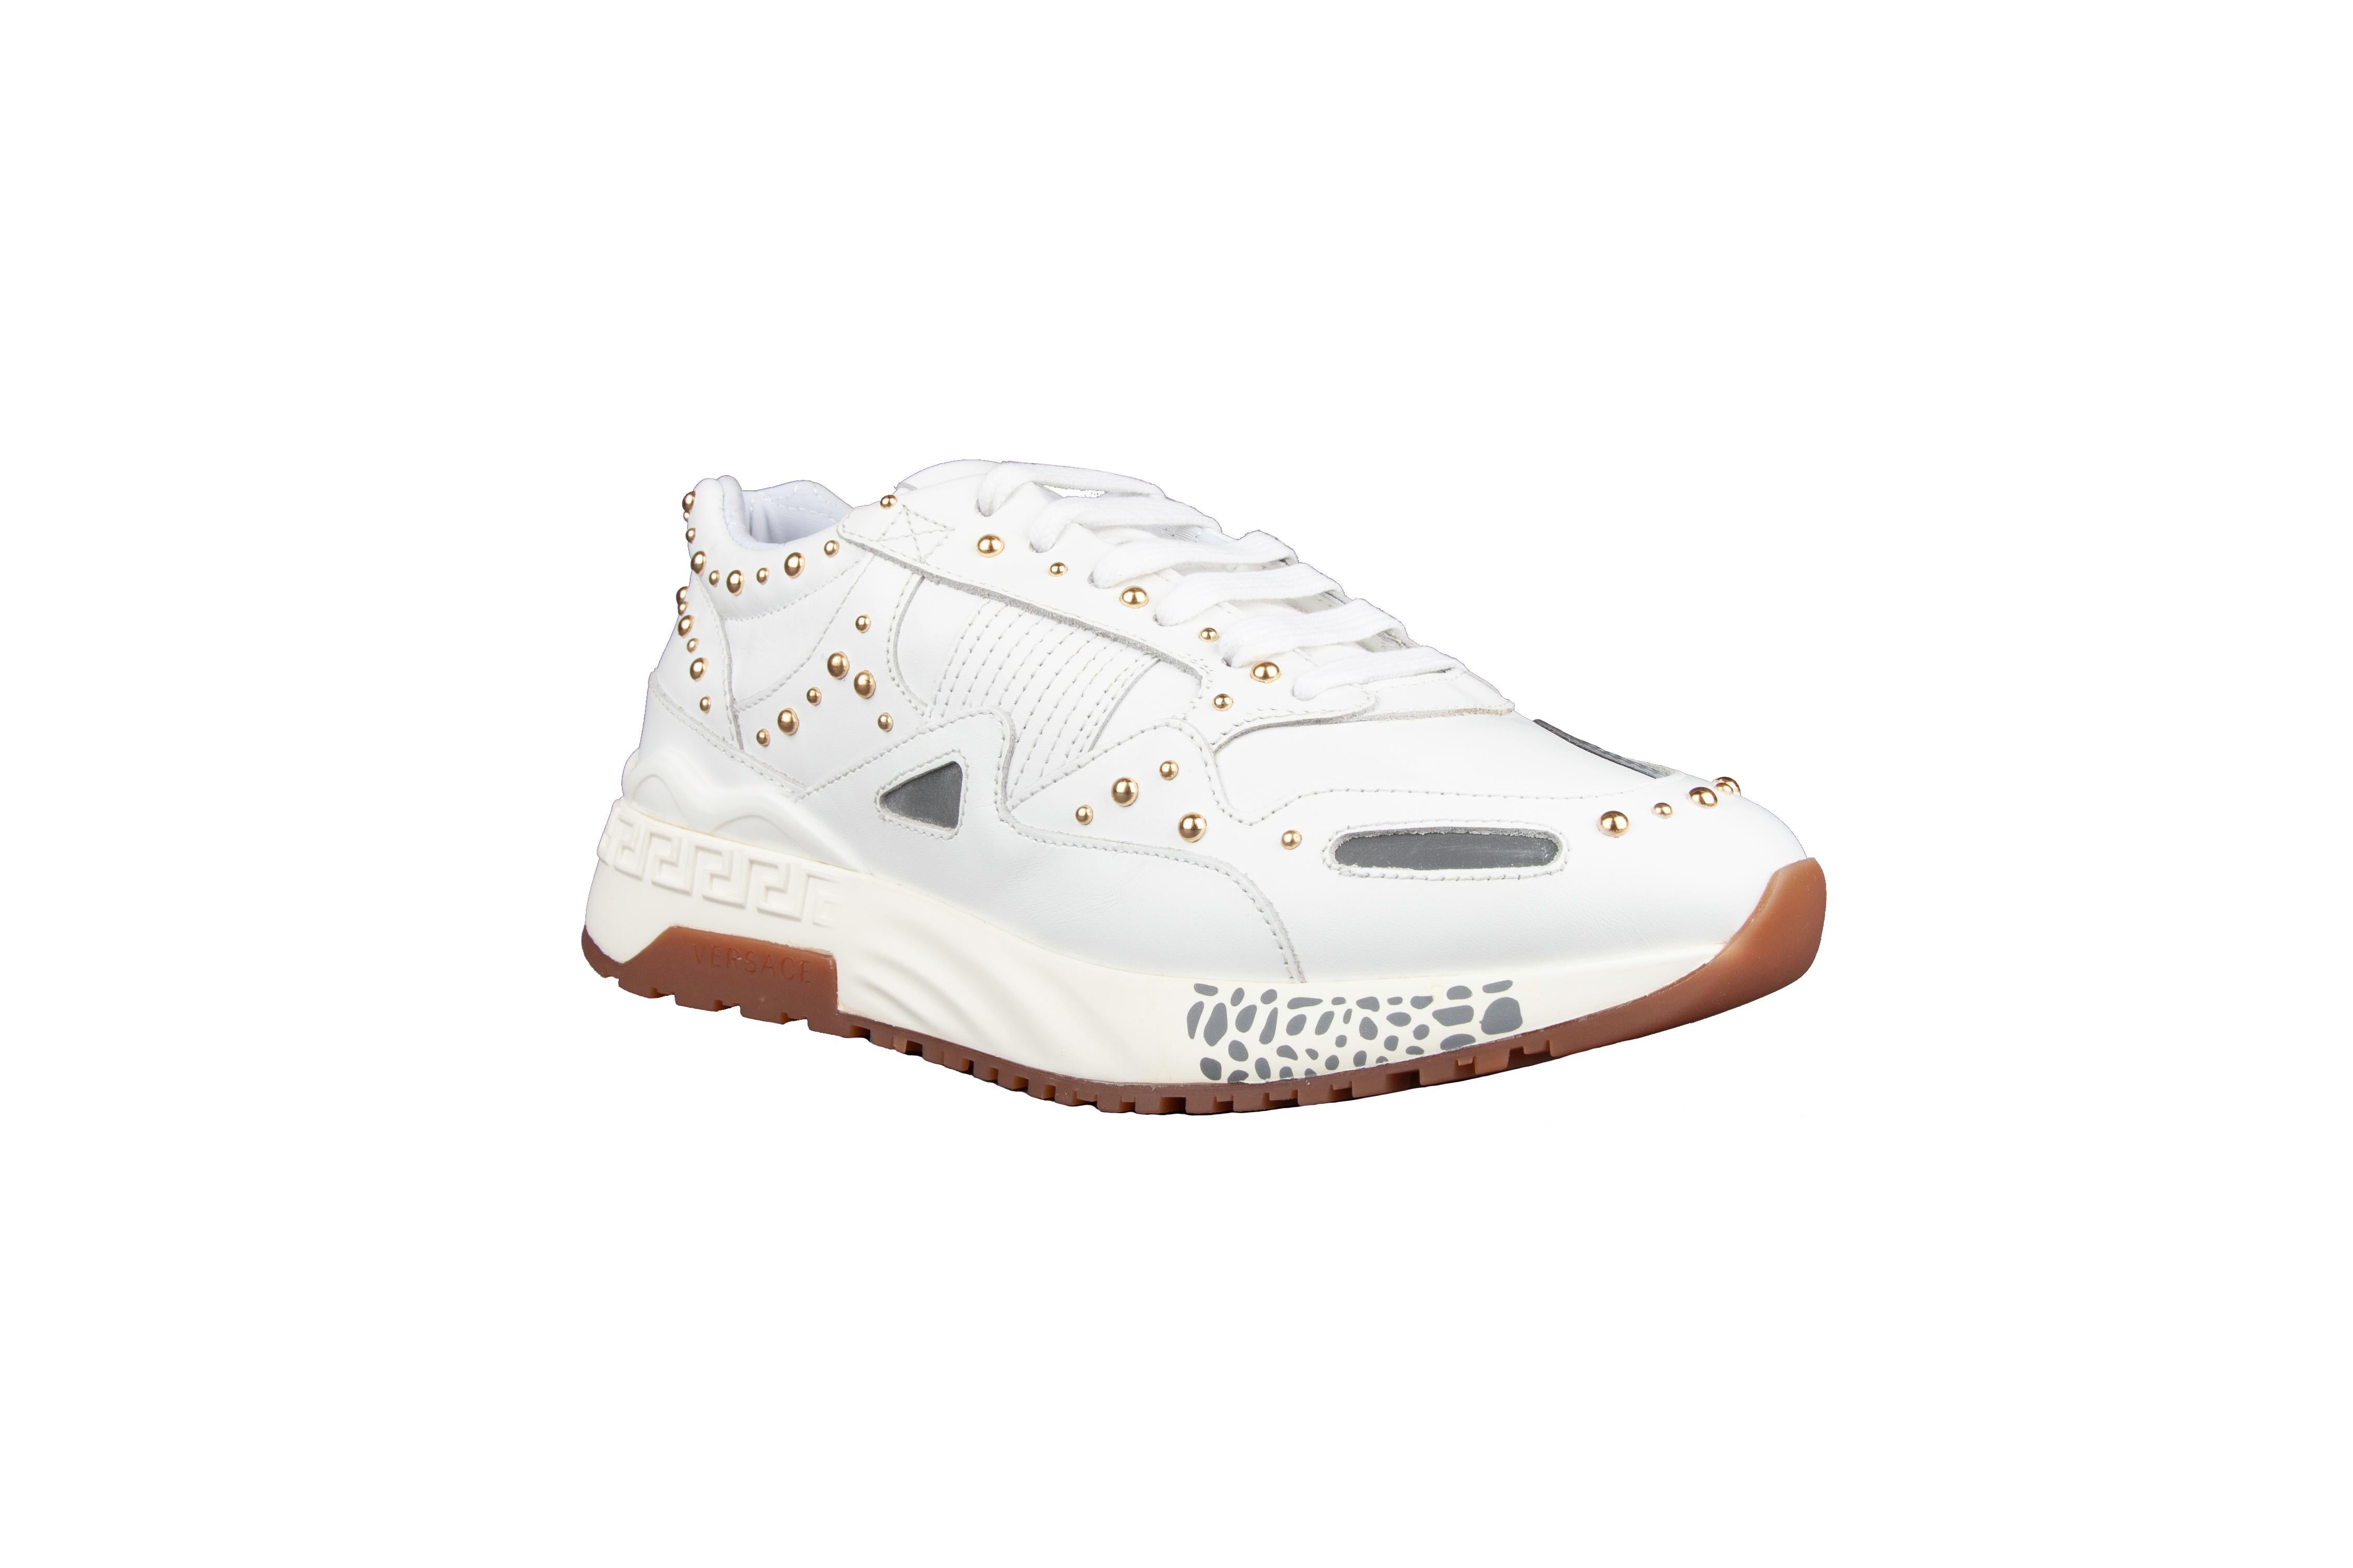 These Versace leather sneakers feature gold tone studs, a lace-up front closure and greca key detailing along the rubble sole. A classic white sneaker with added flare. Brand new. Made in Italy.

Size : 36.5 (IT)